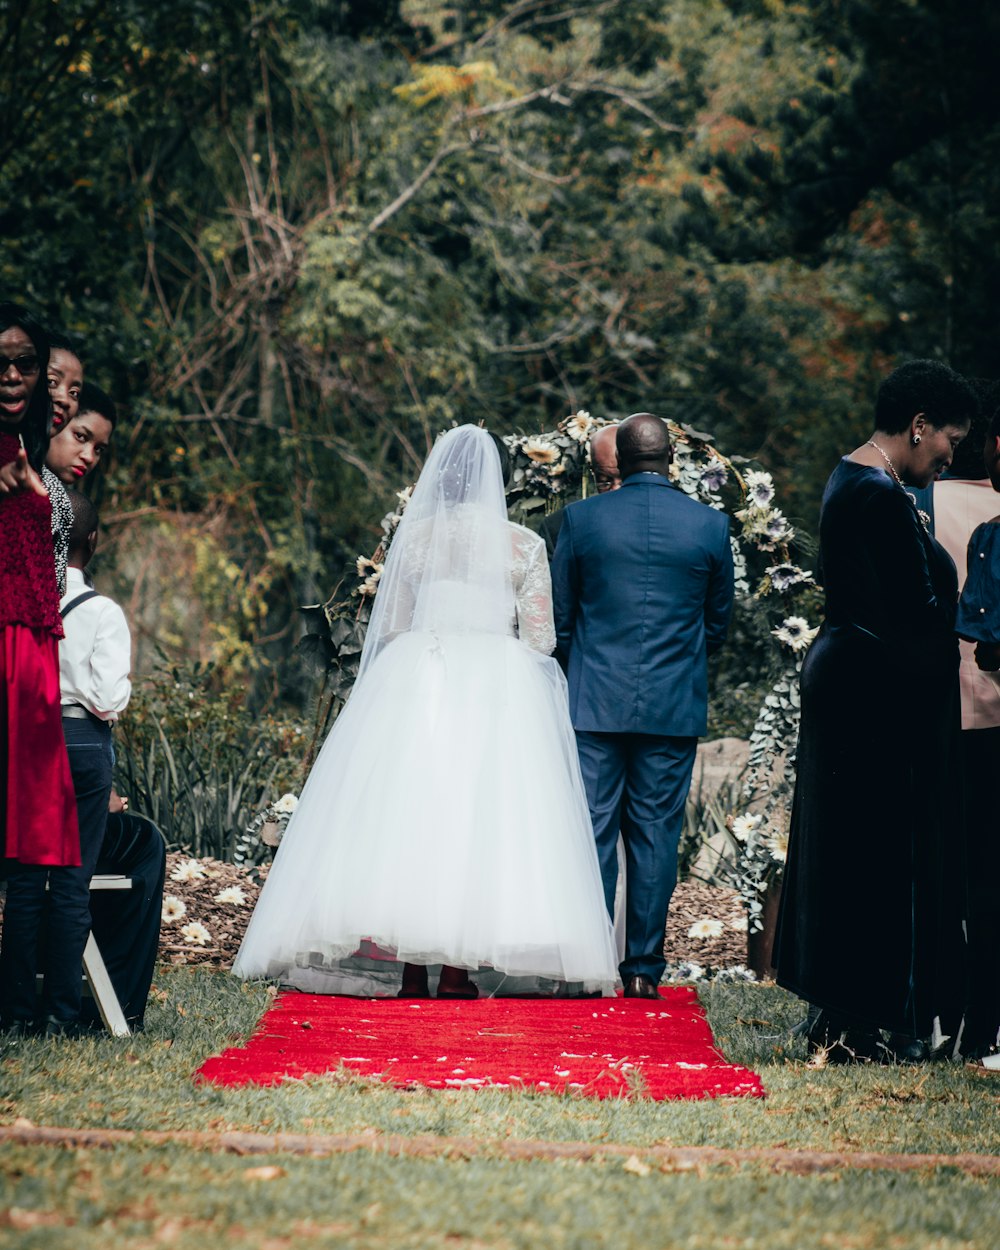 bride and groom standing on red textile surrounded by trees during daytime